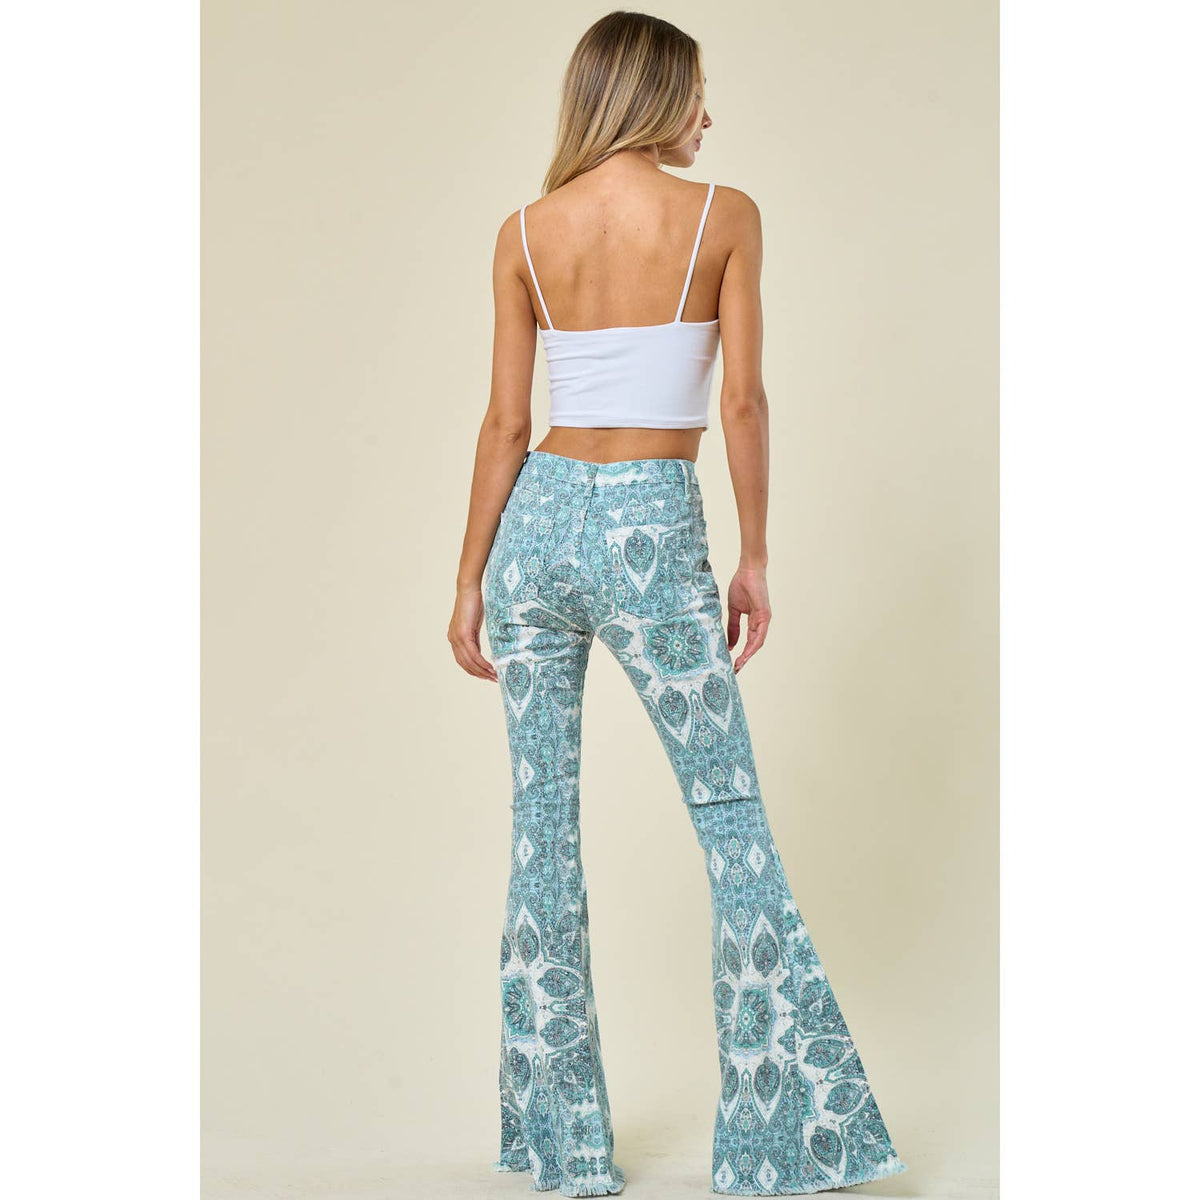 Medallion Printed Distressed Bell Bottom Flares